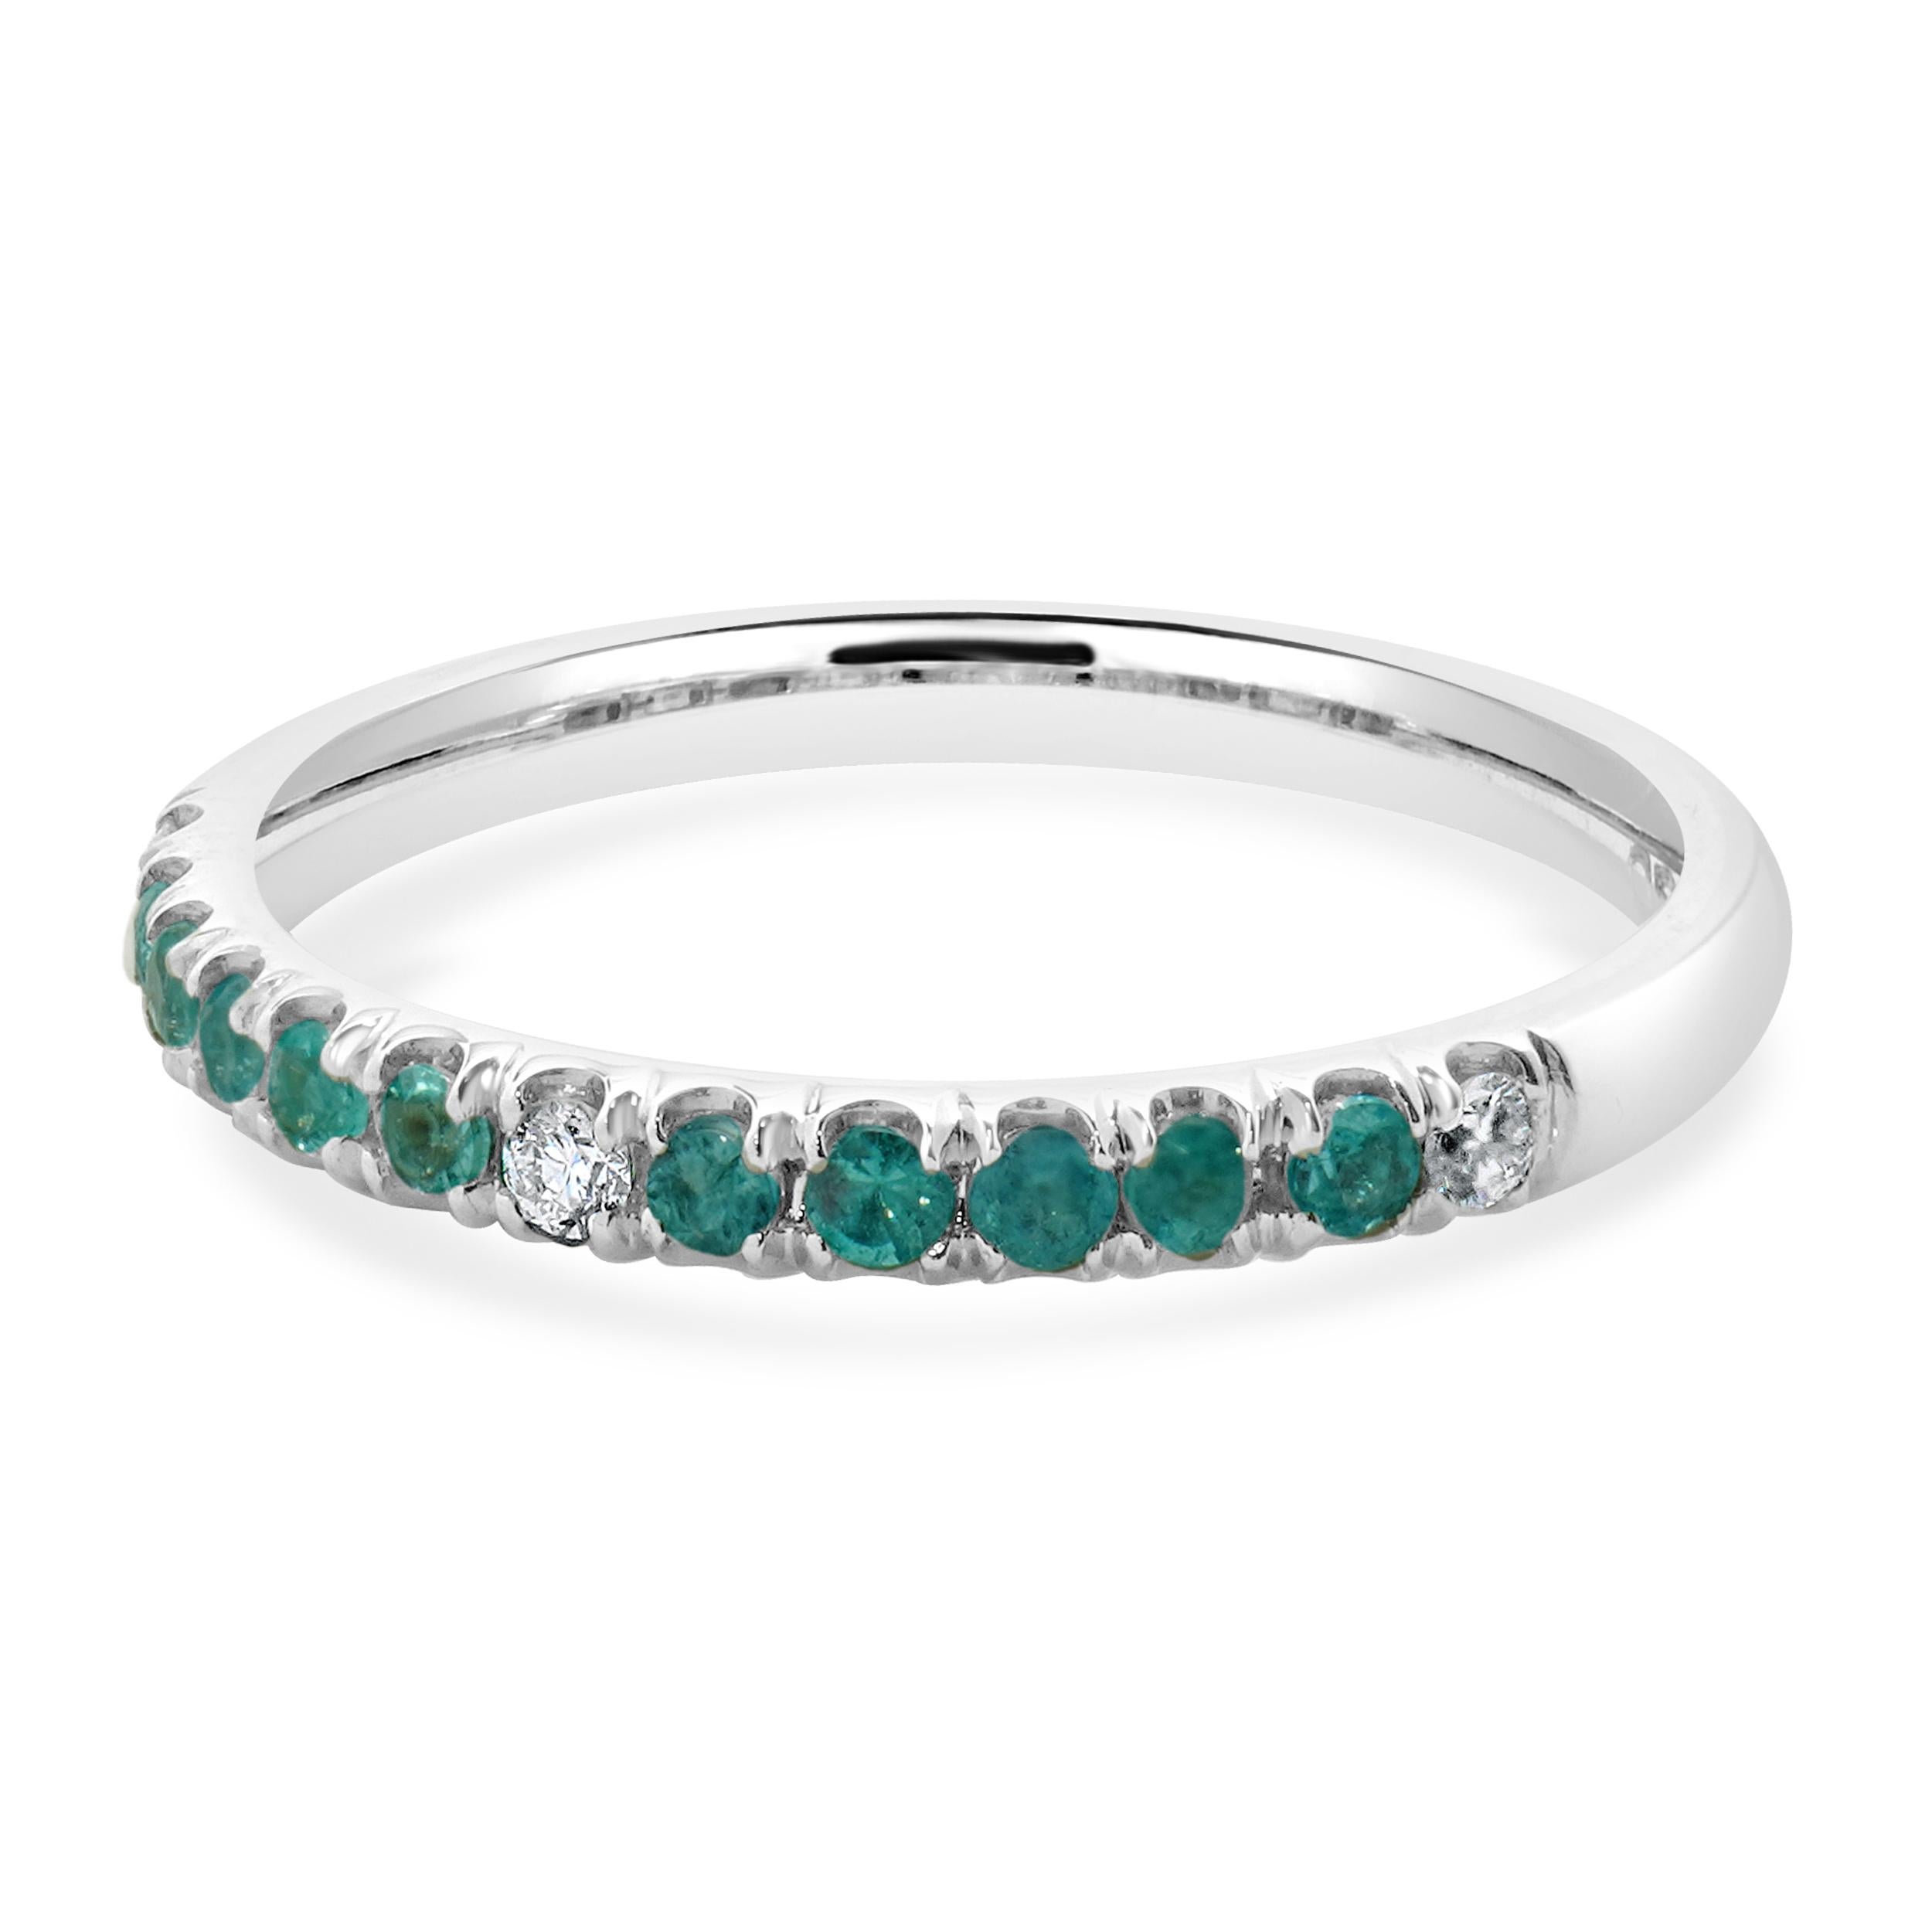 Material: 18K white gold
Diamond: 3 round brilliant cut = .07cttw
Color: G
Clarity: VS2
Paraiba Tourmaline: 10 round cut = .22cttw
Ring Size: 7 (please allow up to 2 additional business days for sizing requests)
Dimensions: ring top measures